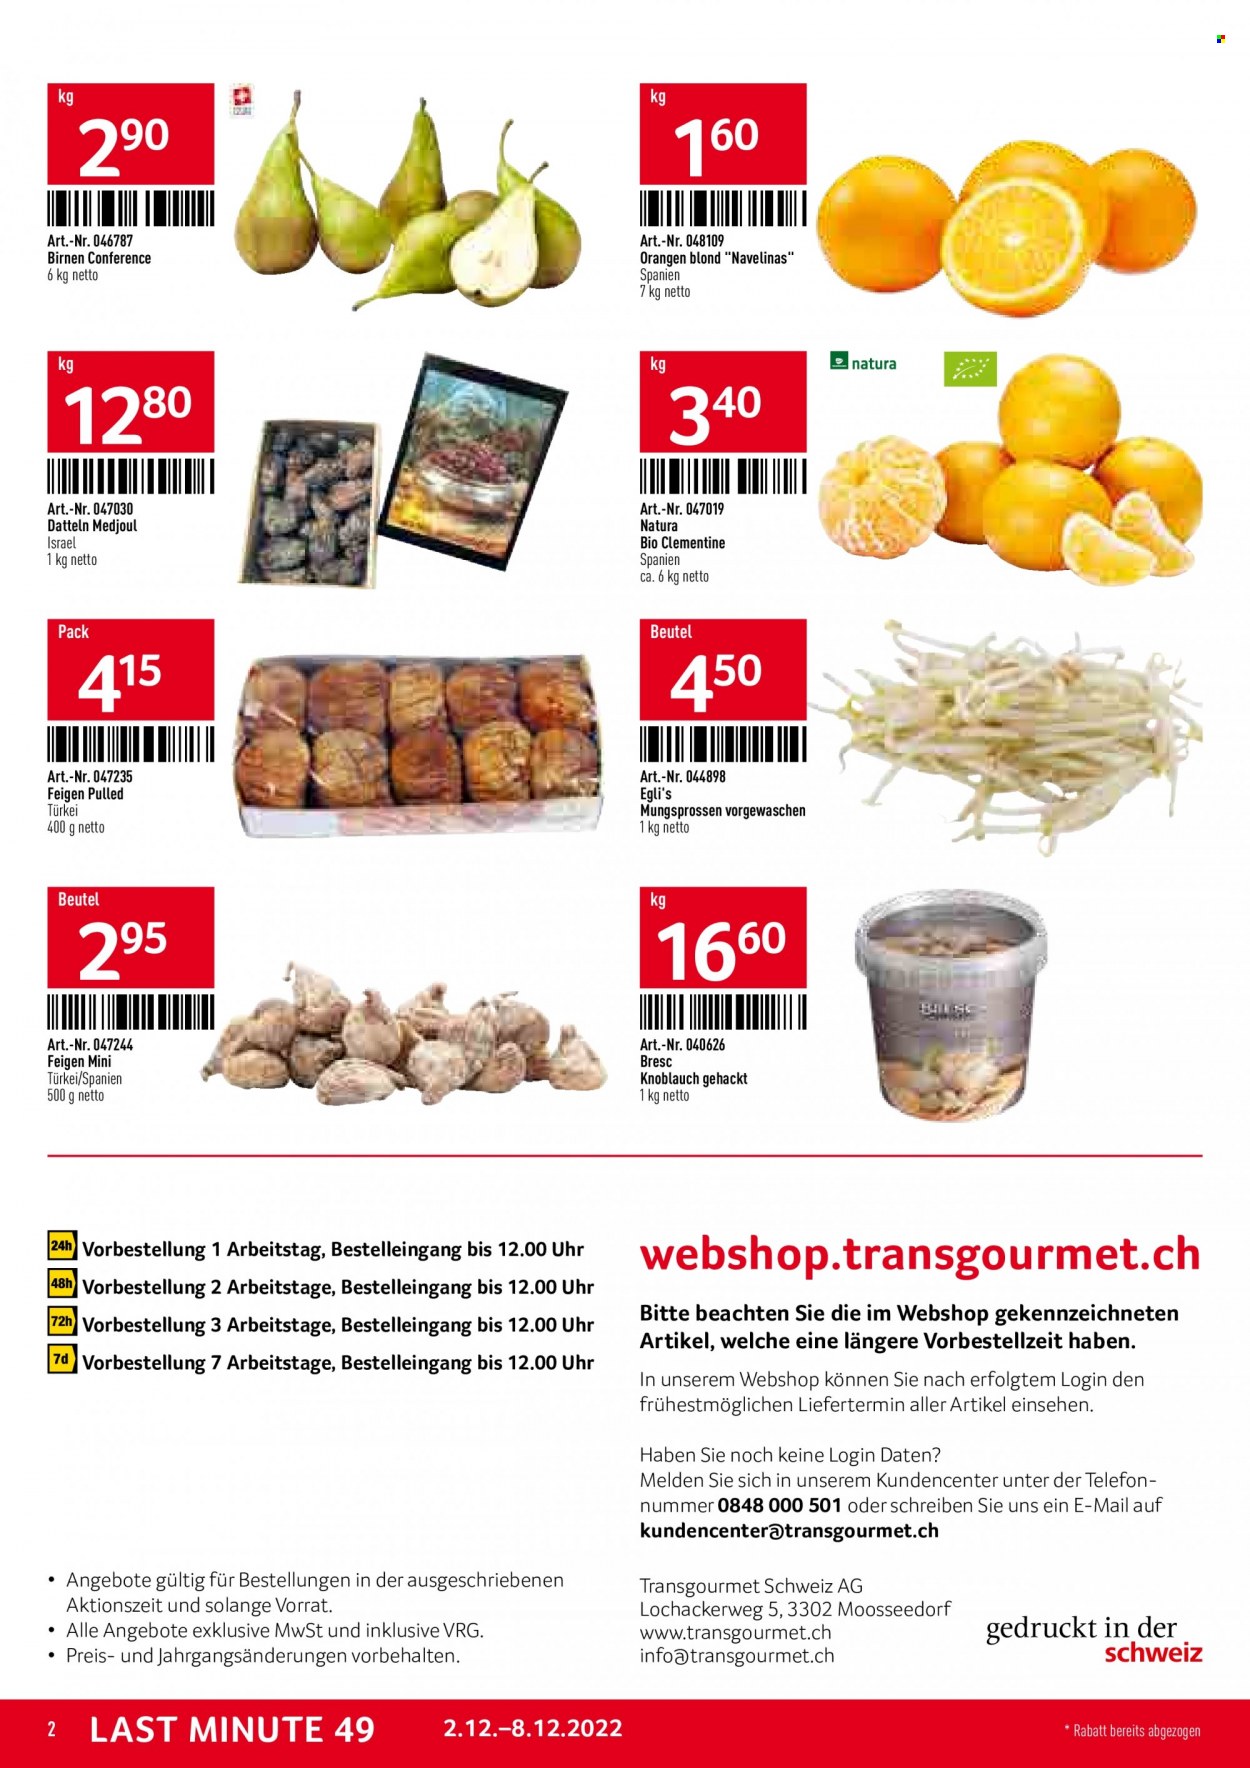 Catalogue TransGourmet - 2.12.2022 - 8.12.2022. Page 2.